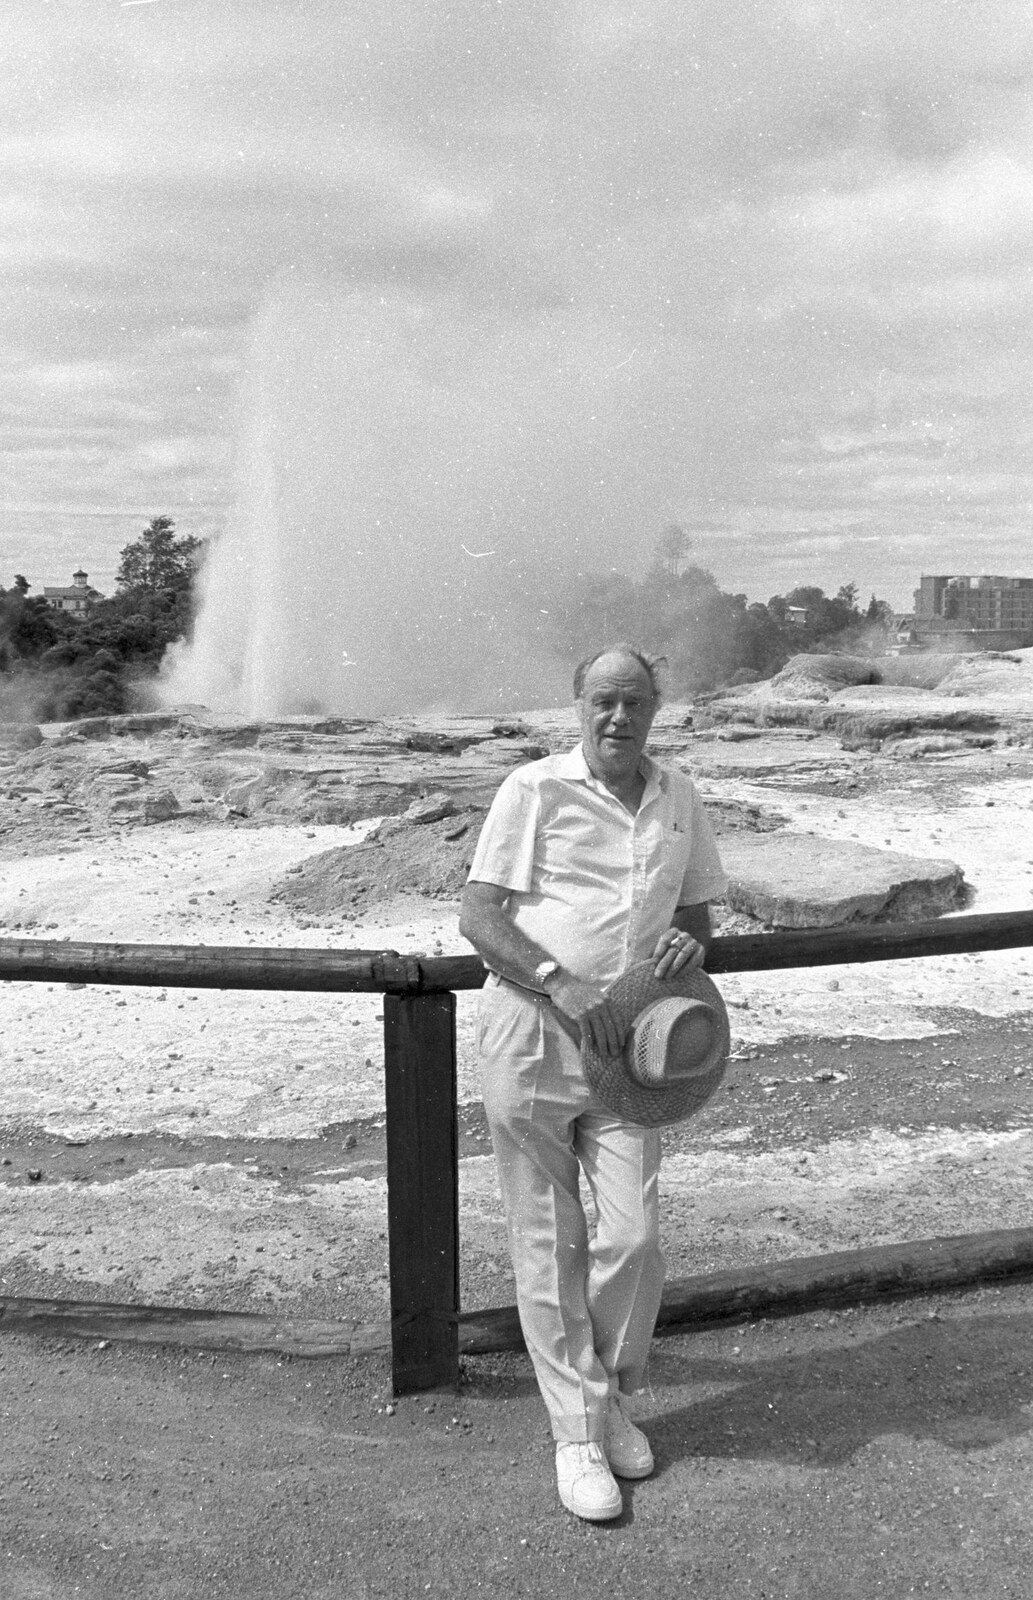 The Old Chap stands in front of the geyser at Rotorua from A Road-trip Through Rotorua to Palmerston, North Island, New Zealand - 27th November 1992